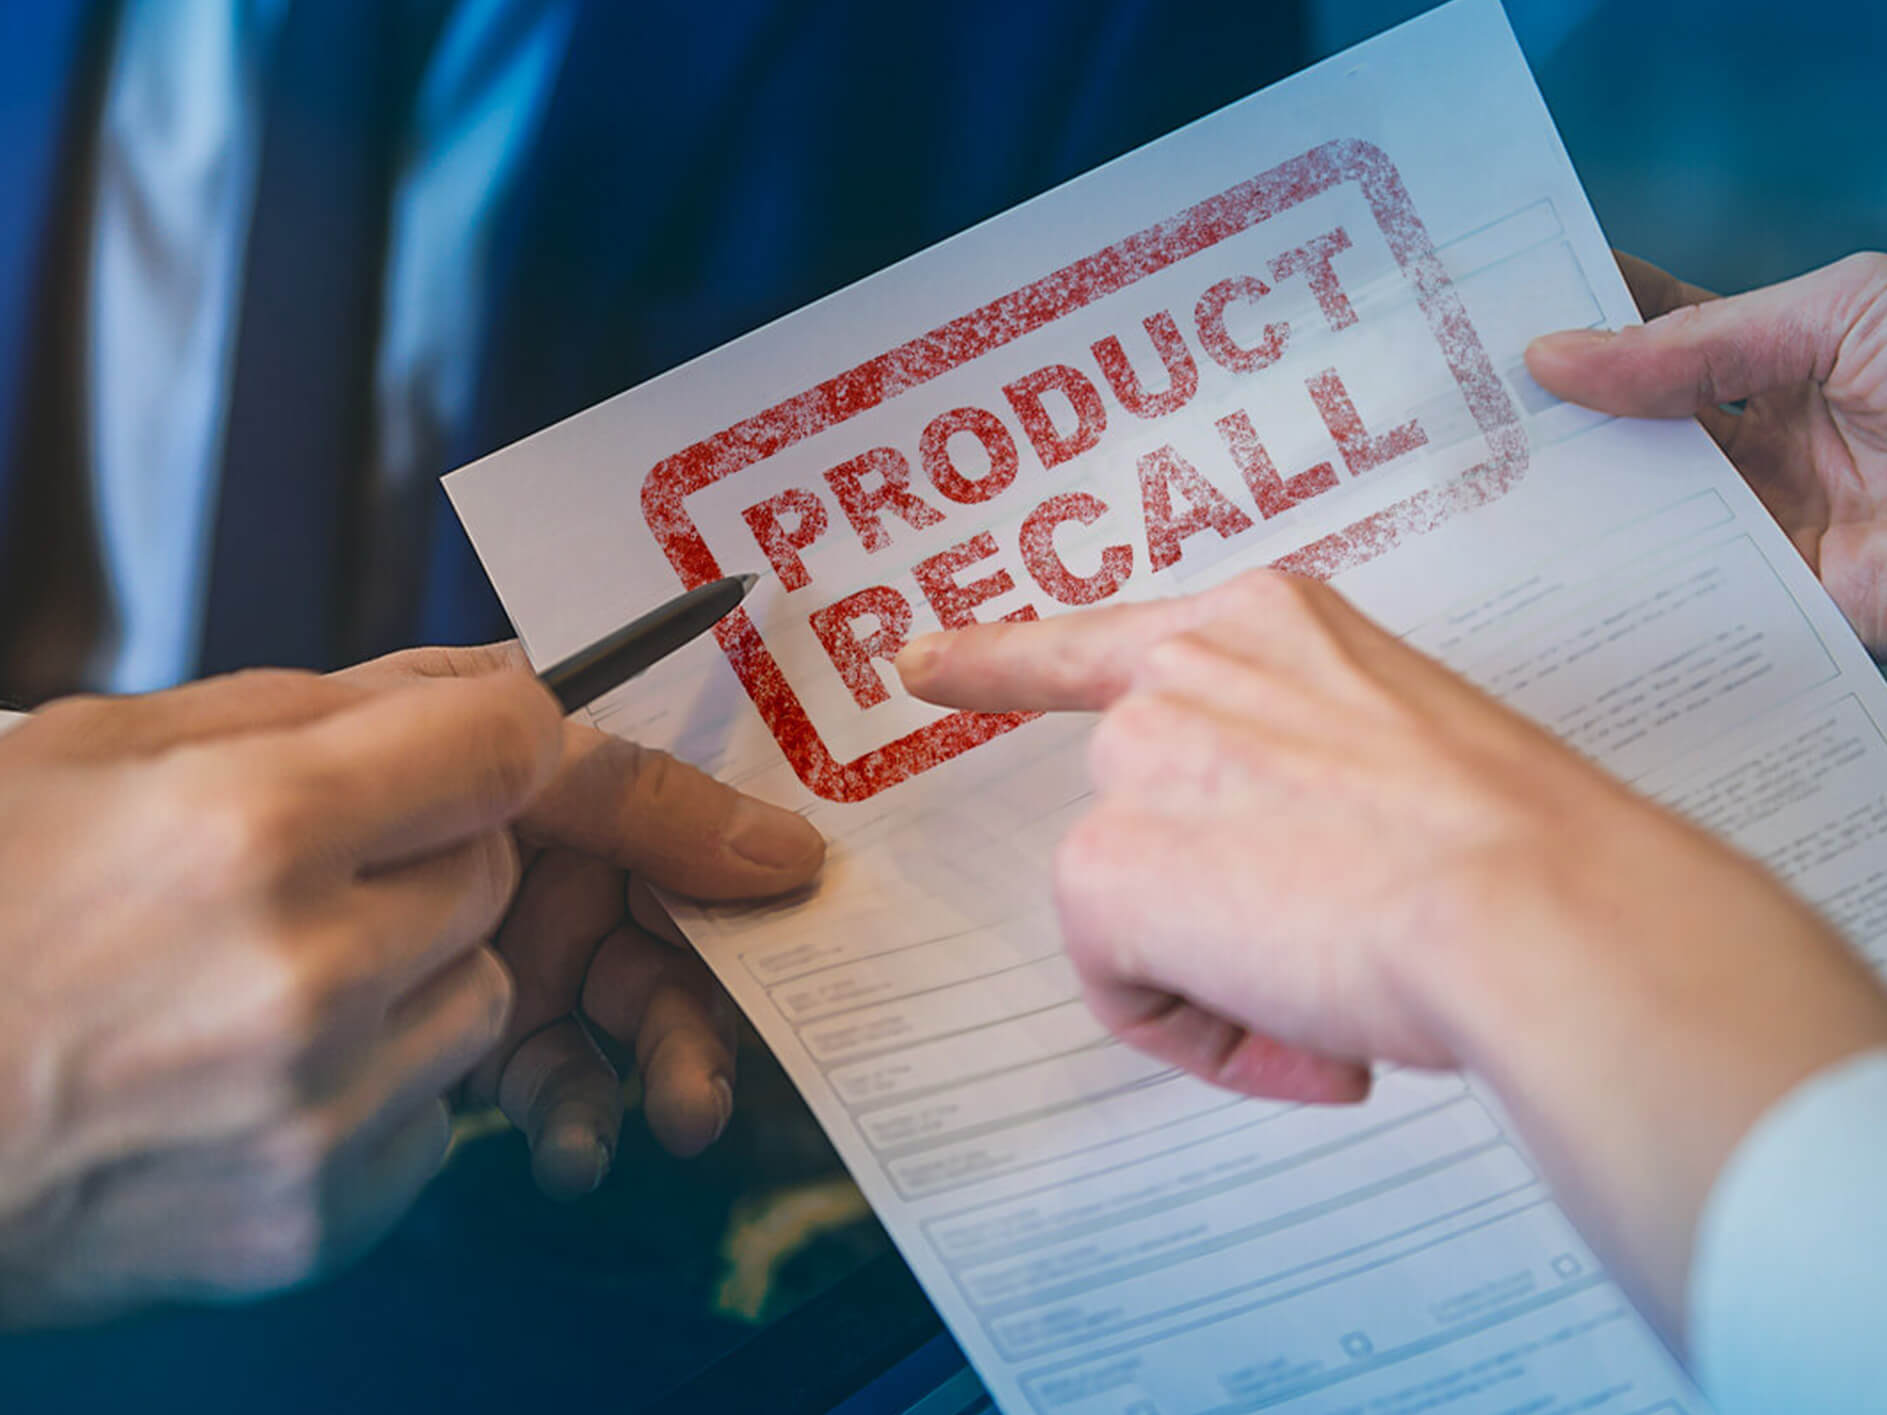 Insurance coverage for product recalls